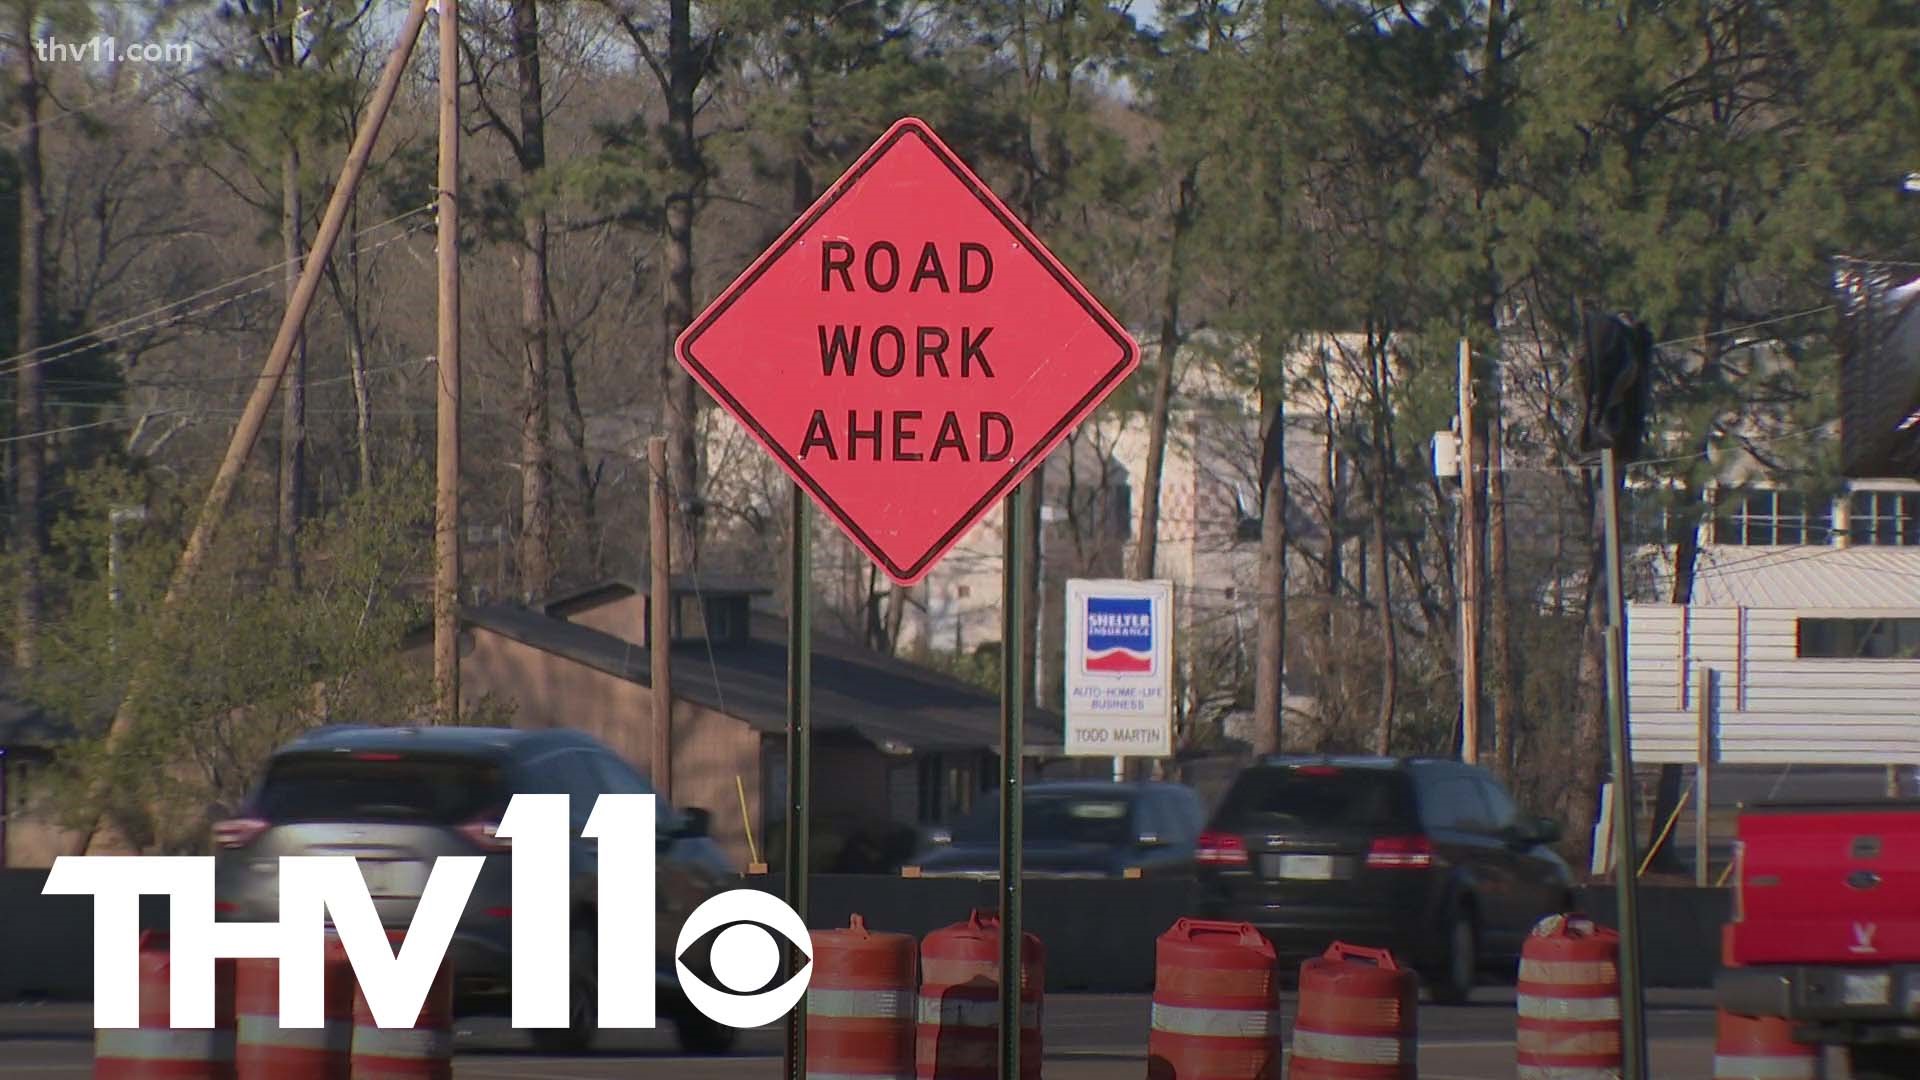 Starting Monday, March 20, a widening project will begin on Highway 67 in the heart of Jacksonville.